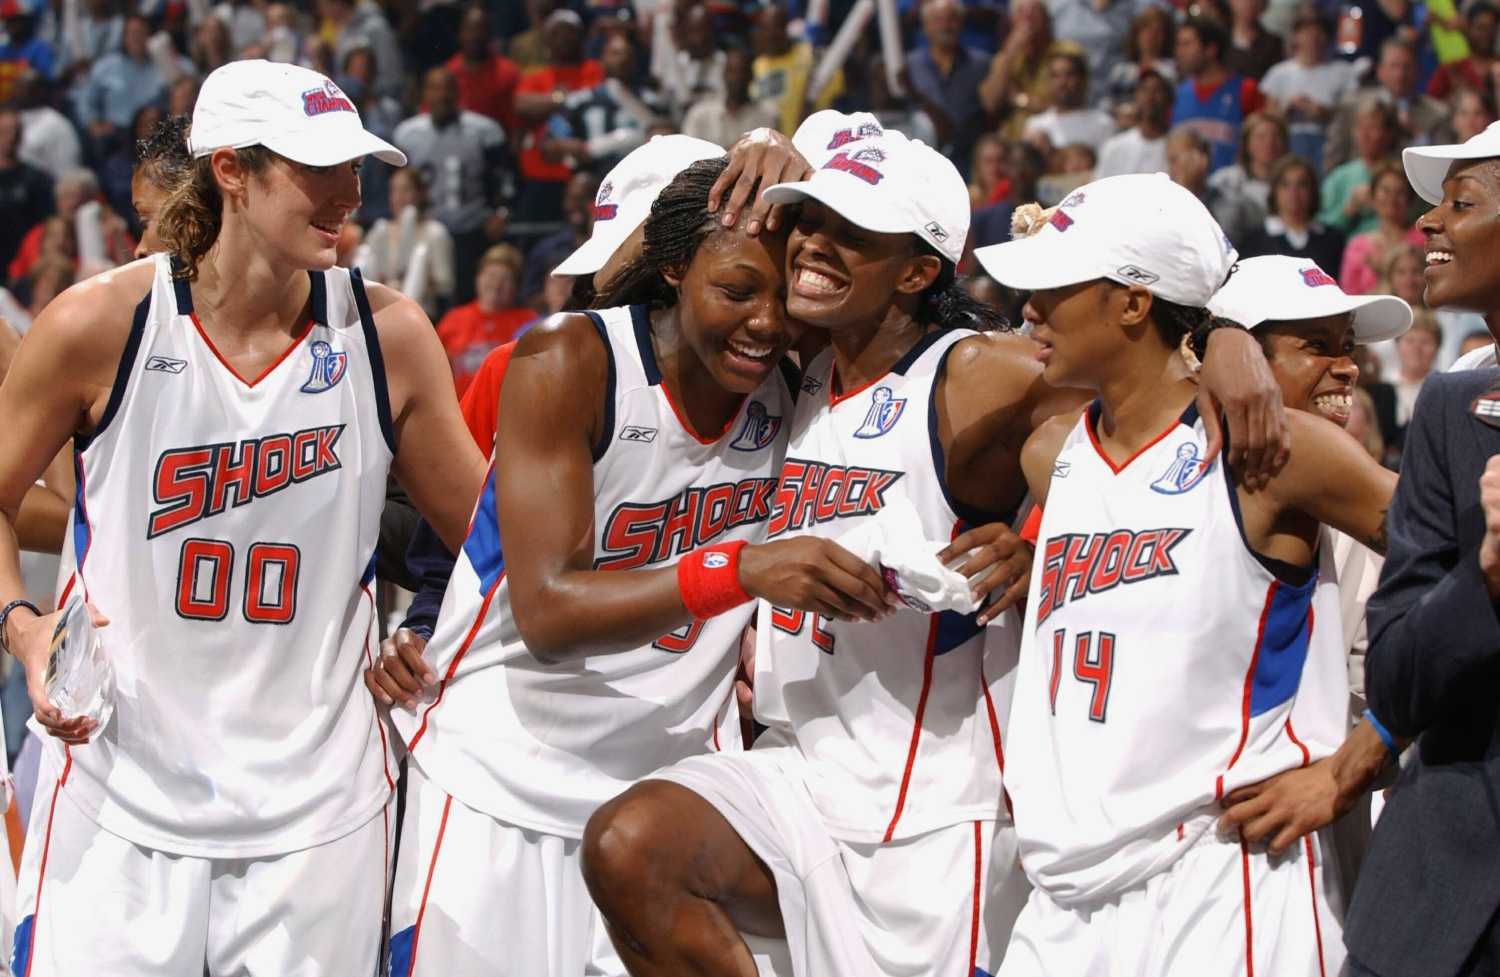  The Detroit Shock “Shocked” the World in 2003